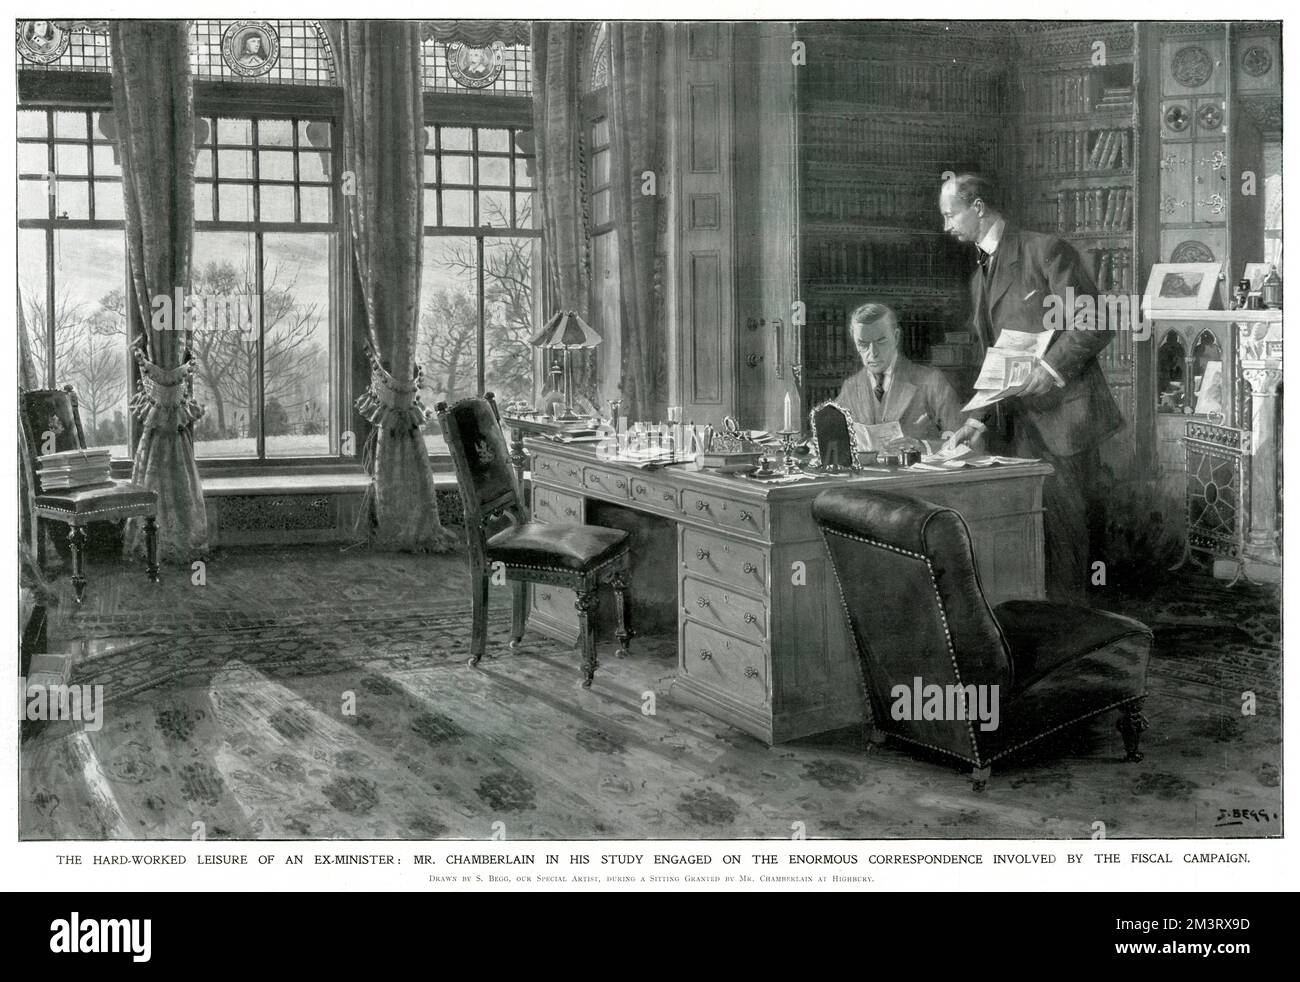 Joseph Chamberlain in his study engaged on the enormous correspondence involved by the fiscal campaign. Chamberlain is assisted by his private secretary, Mr Wilson.     Date: 1903 Stock Photo